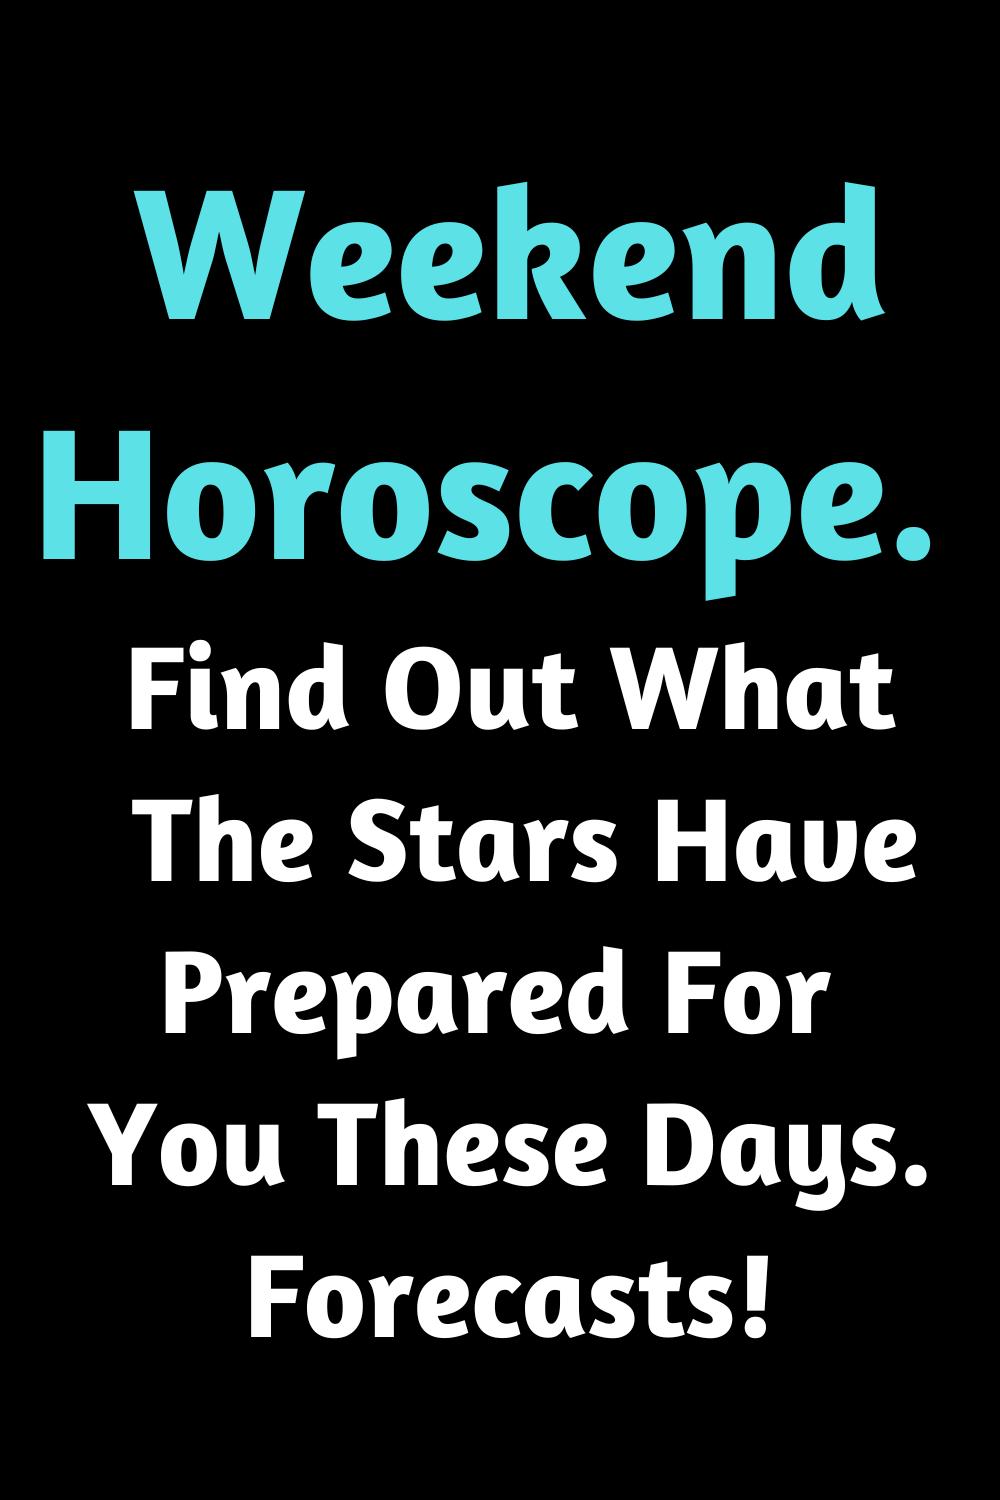 Weekend Horoscope. Find Out What The Stars Have Prepared For You These Days. Forecasts!